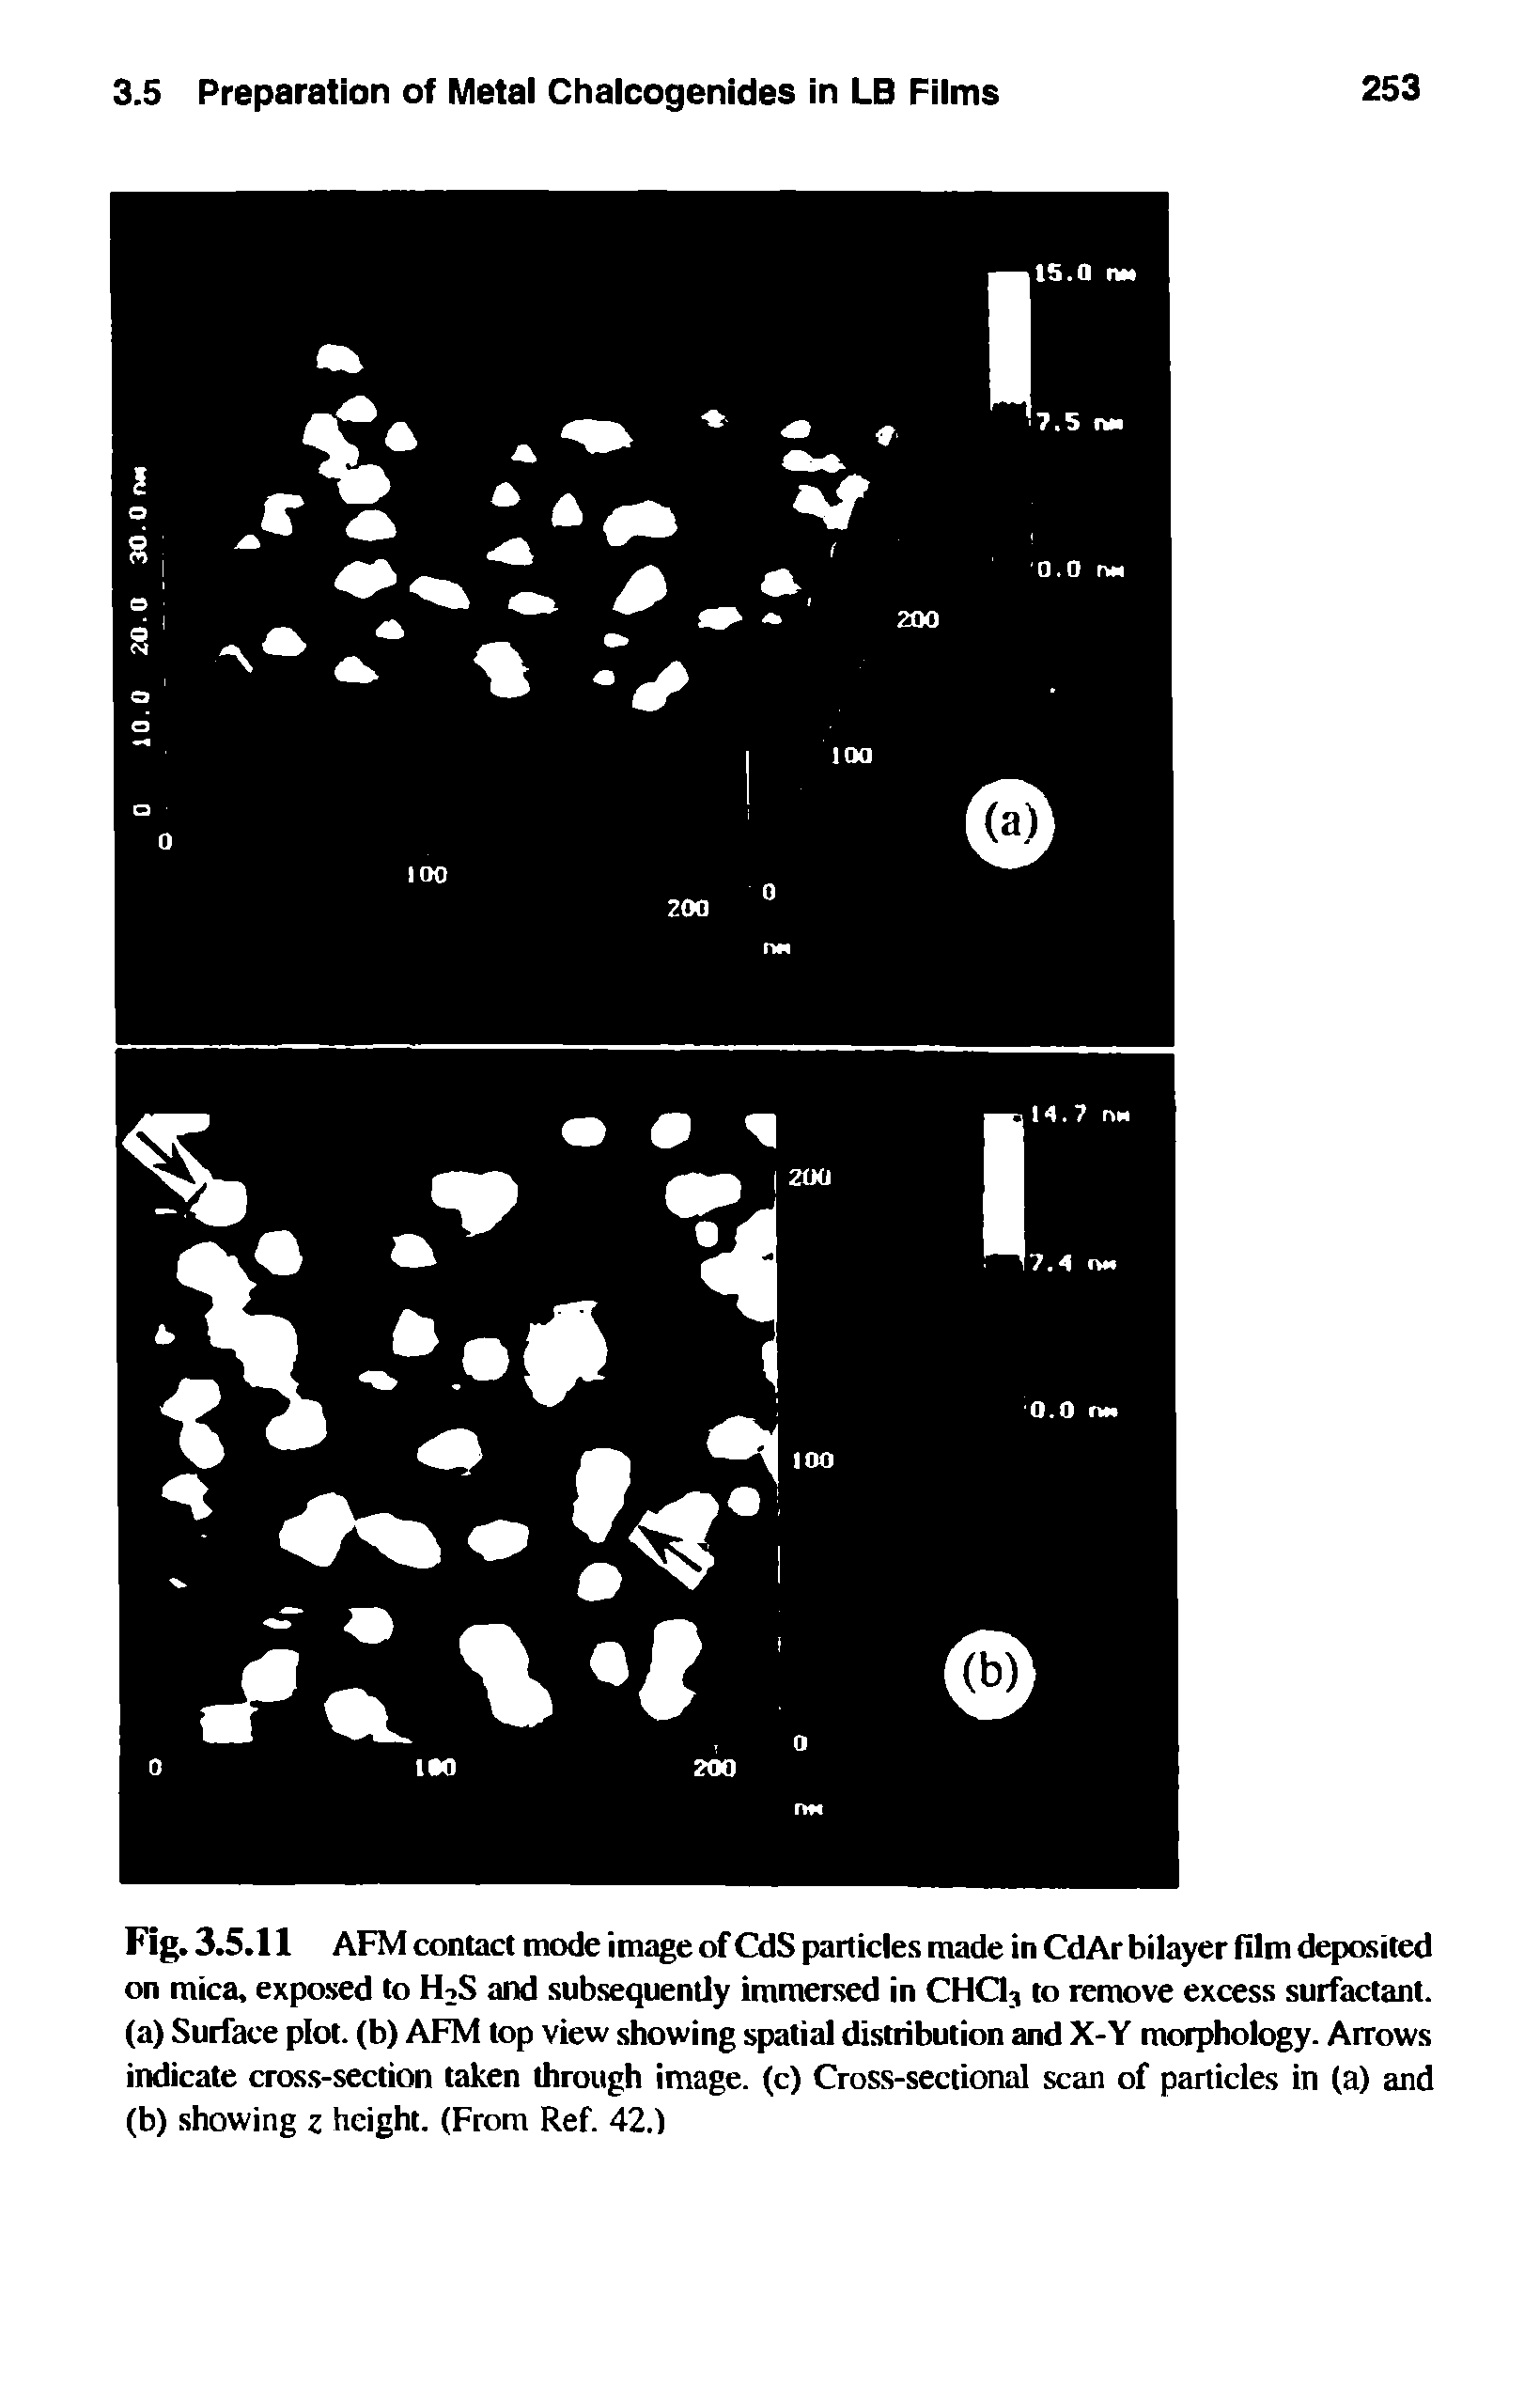 Fig. 3.5.11 AFM contact mode image of CdS particles made in CdAr bilayer film deposited on mica, exposed to H2S and subsequently immersed in CHC13 to remove excess surfactant.